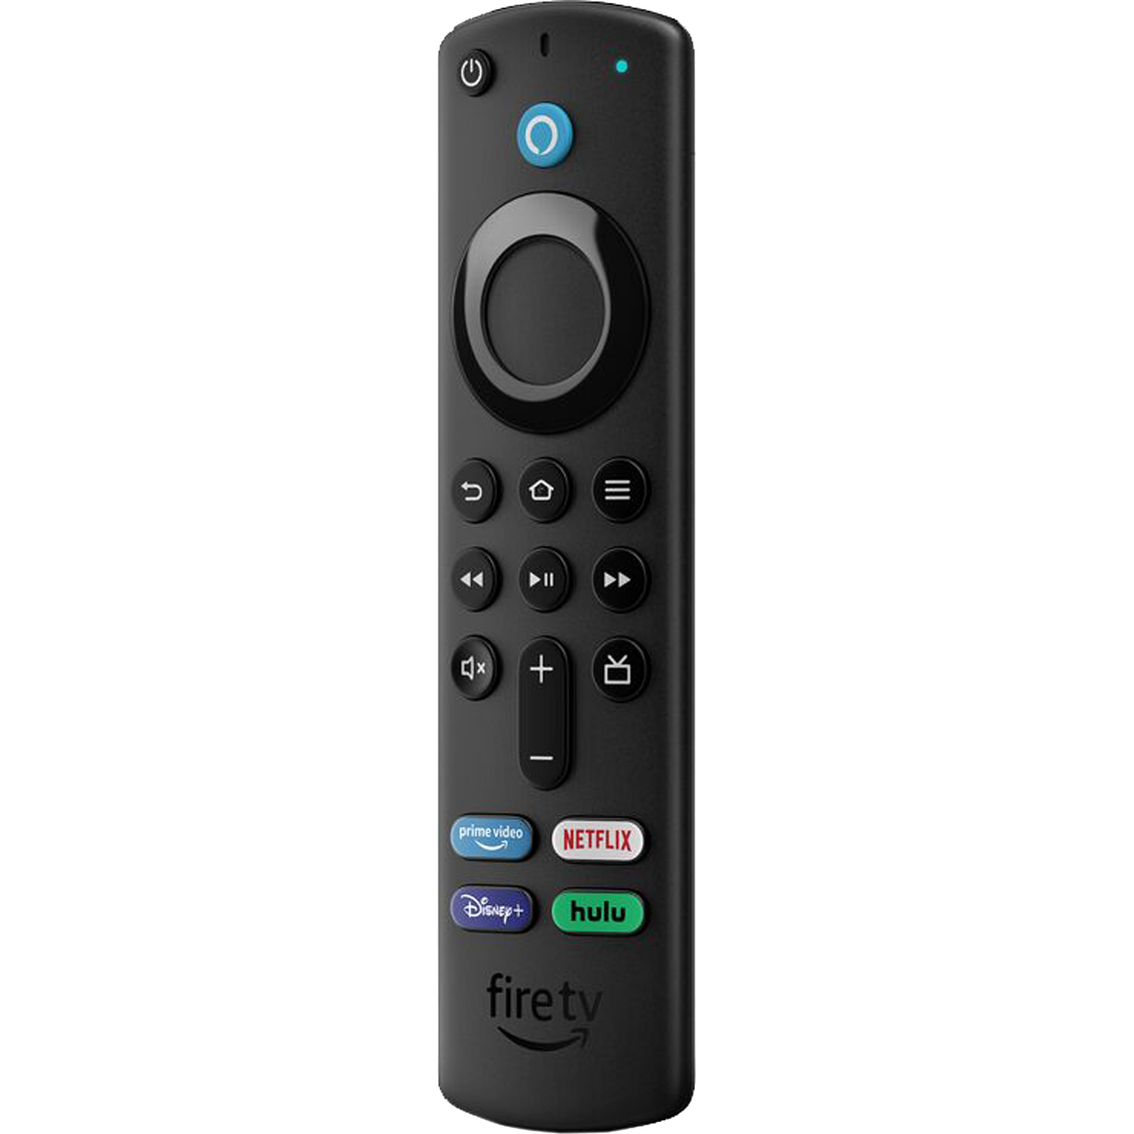 Fire Tv Stick 4k With Alexa Voice Remote Includes Tv Controls, Streaming Media, Electronics